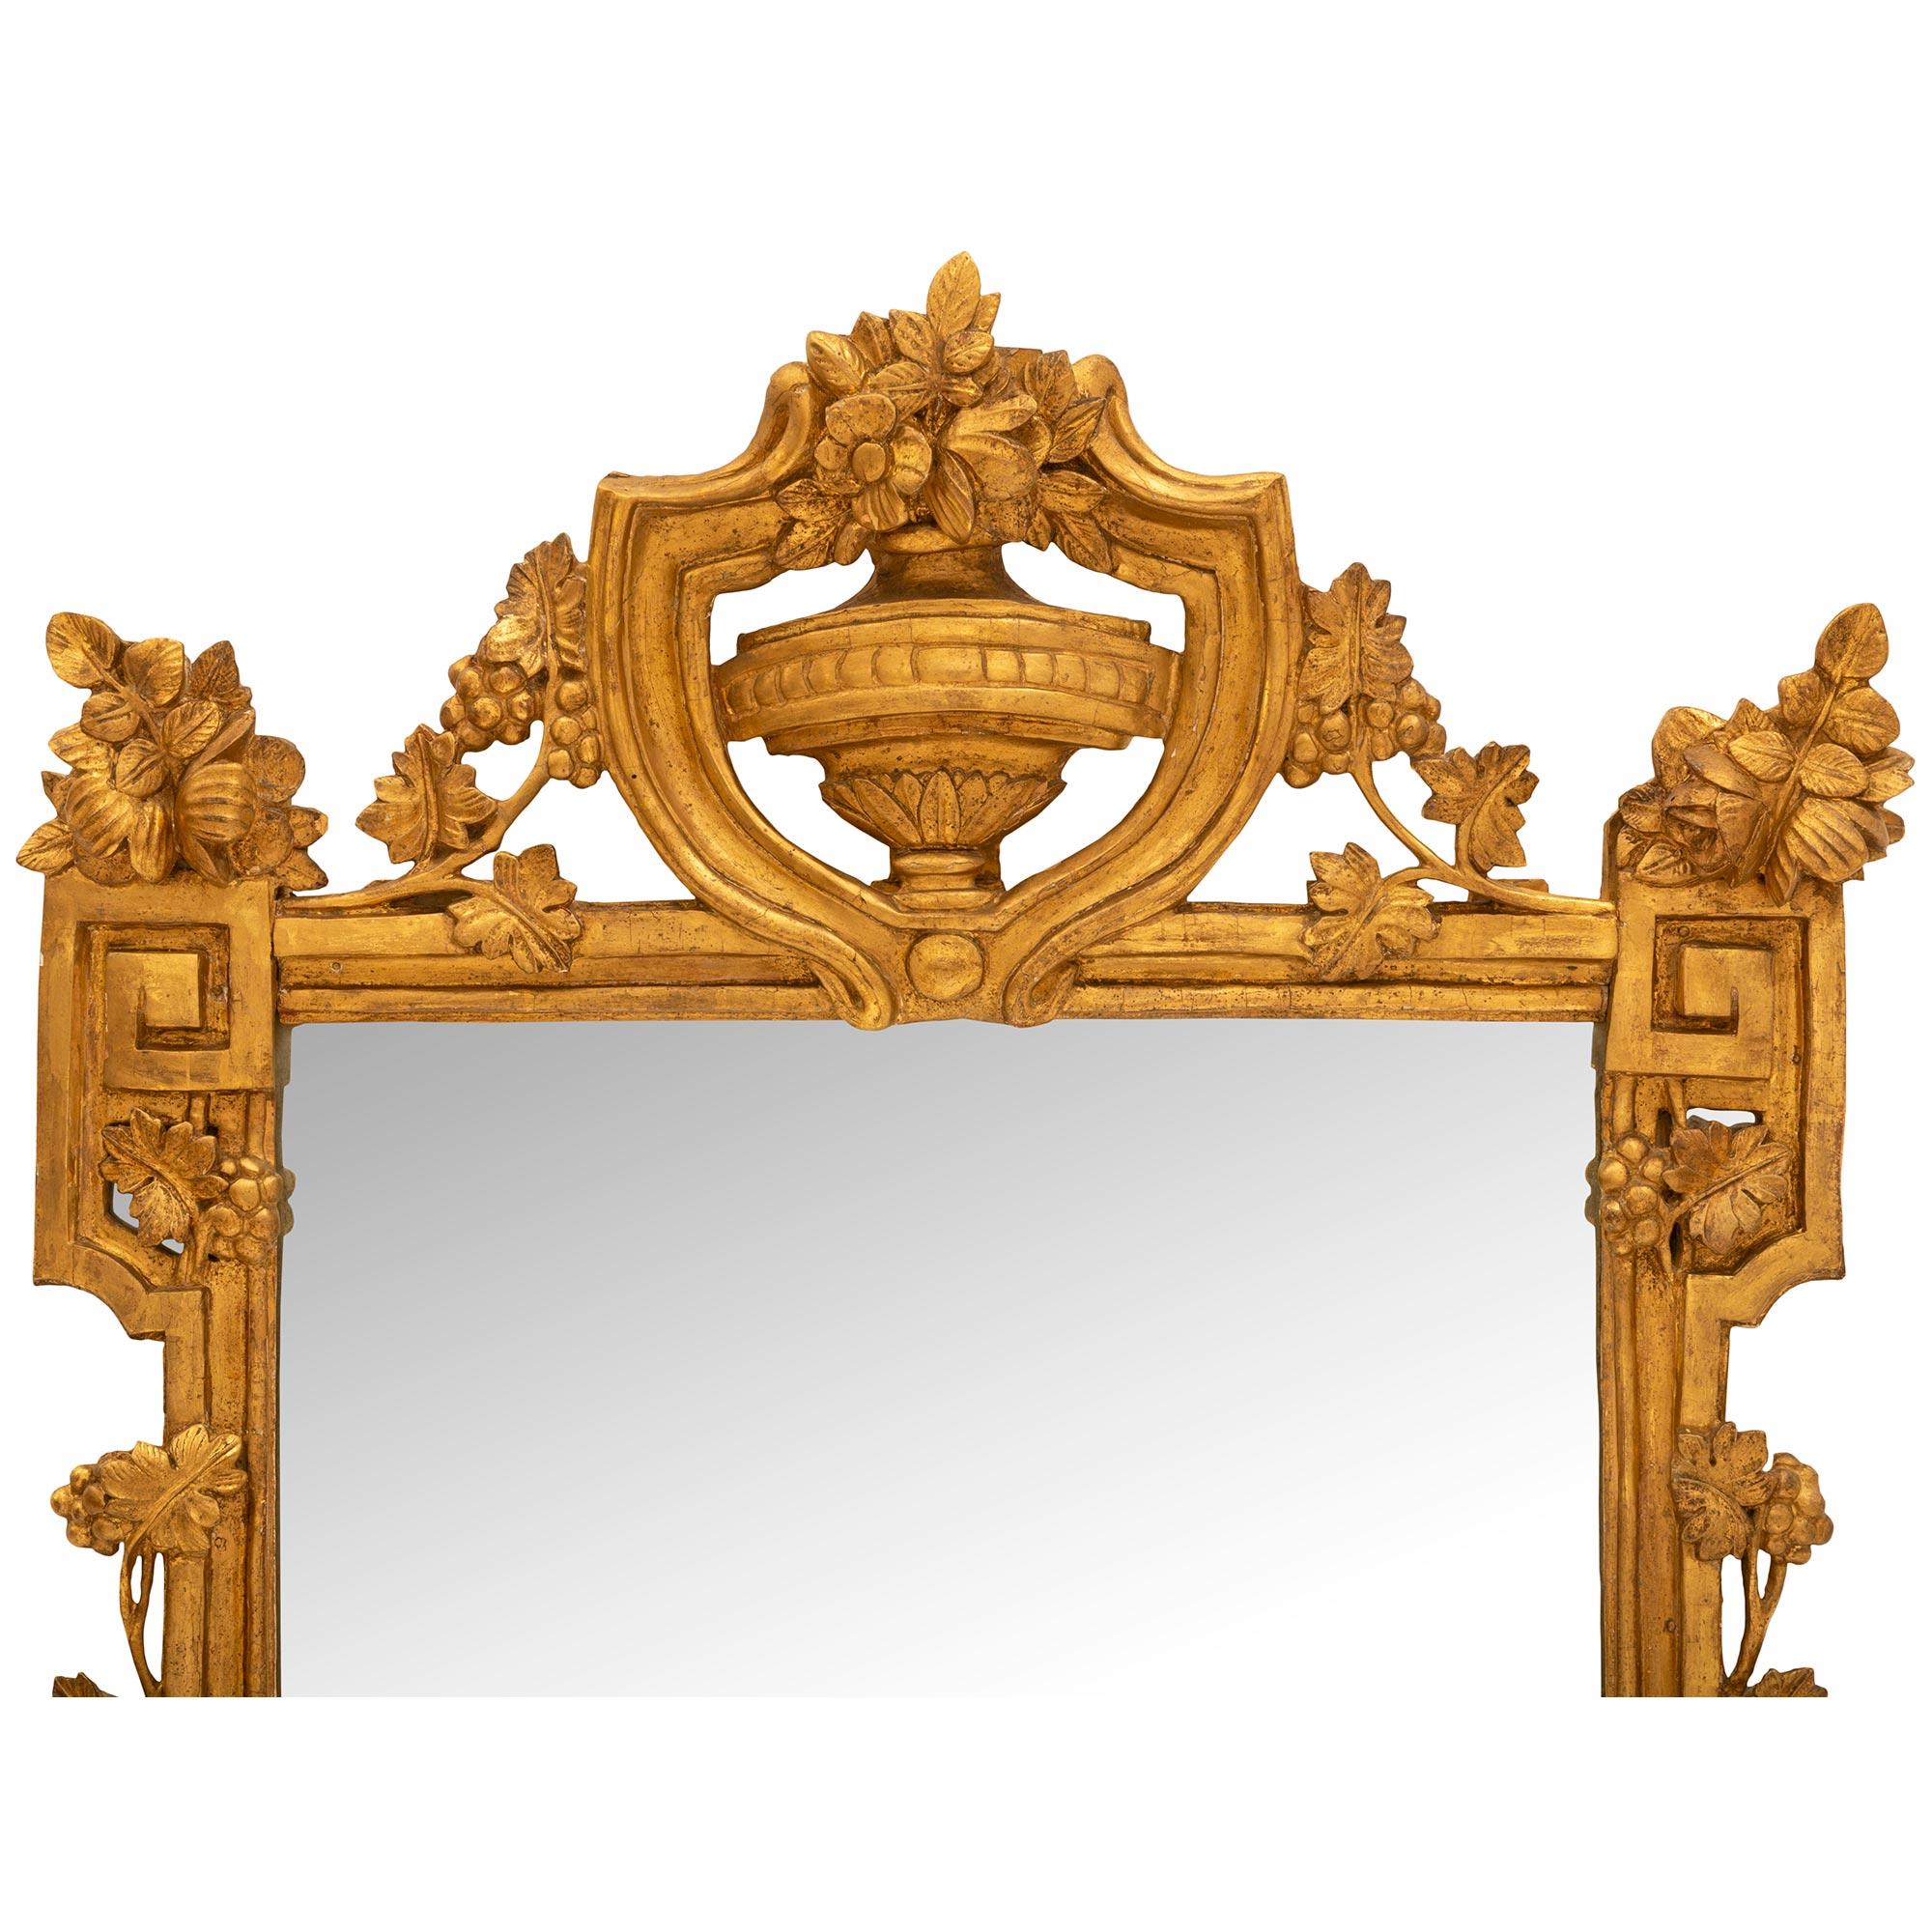 French 18th Century Régence Period Provançal Style Giltwood Mirror In Good Condition For Sale In West Palm Beach, FL